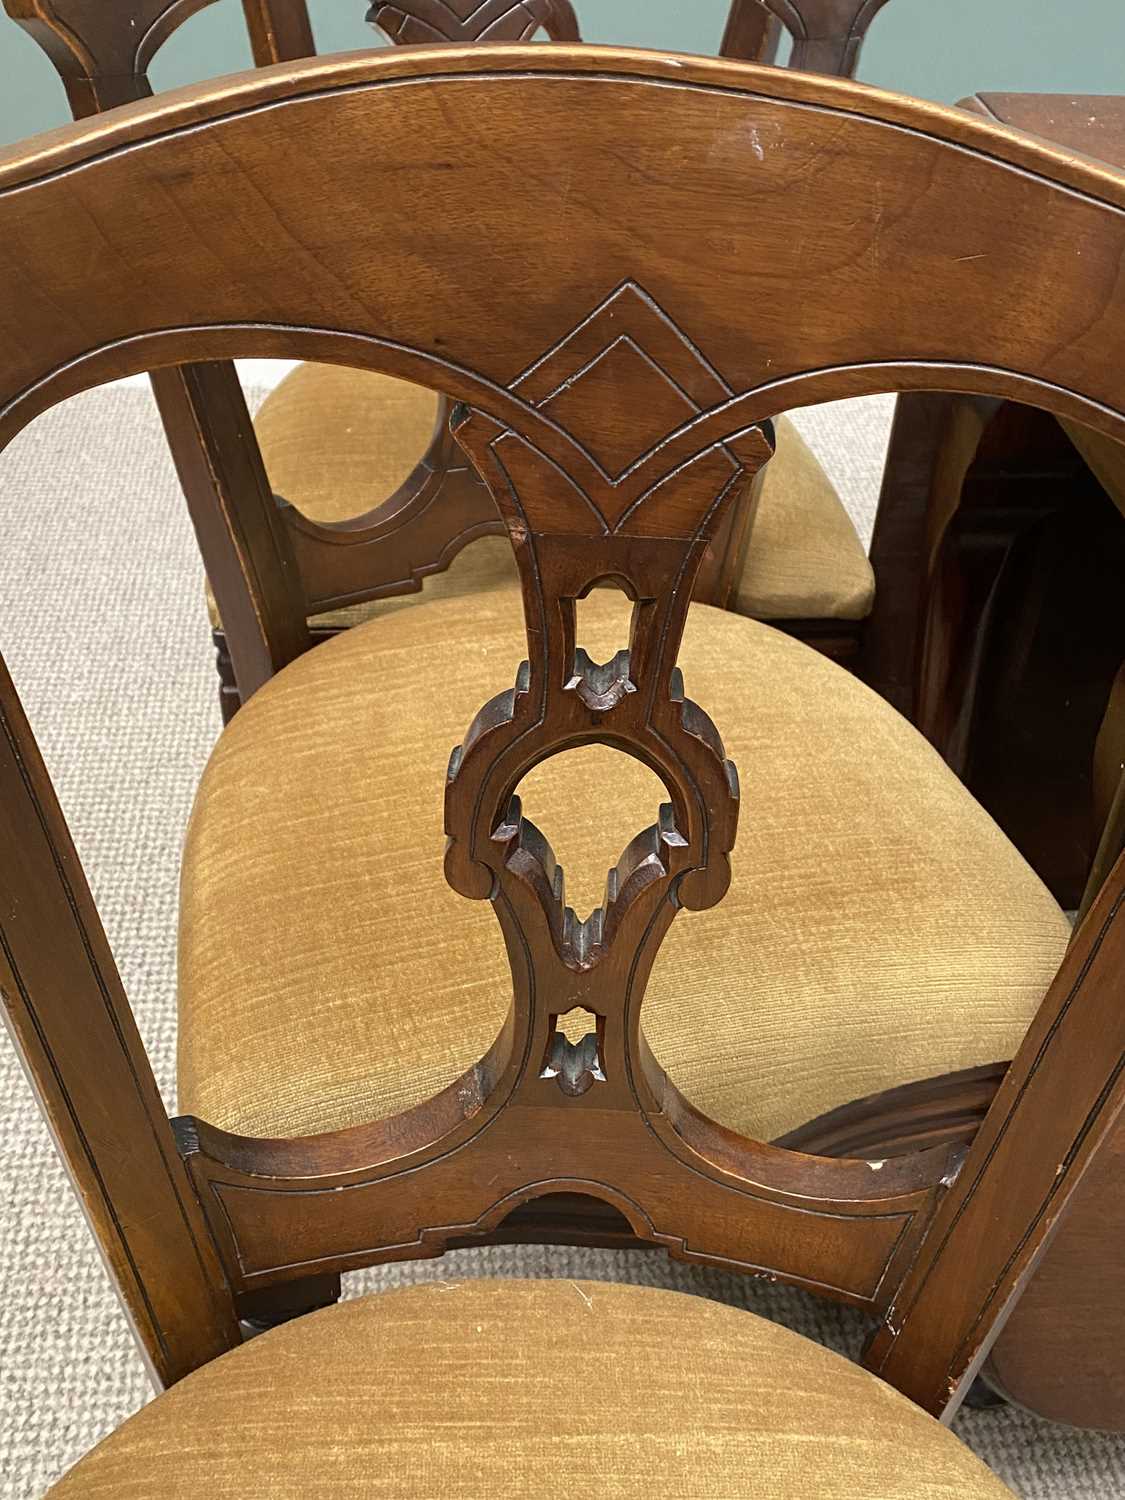 VICTORIAN MAHOGANY GATELEG TABLE & SIX PIERCED-SPLAT BACK CHAIRS, the table 75 (h) x 163 (w - - Image 2 of 5